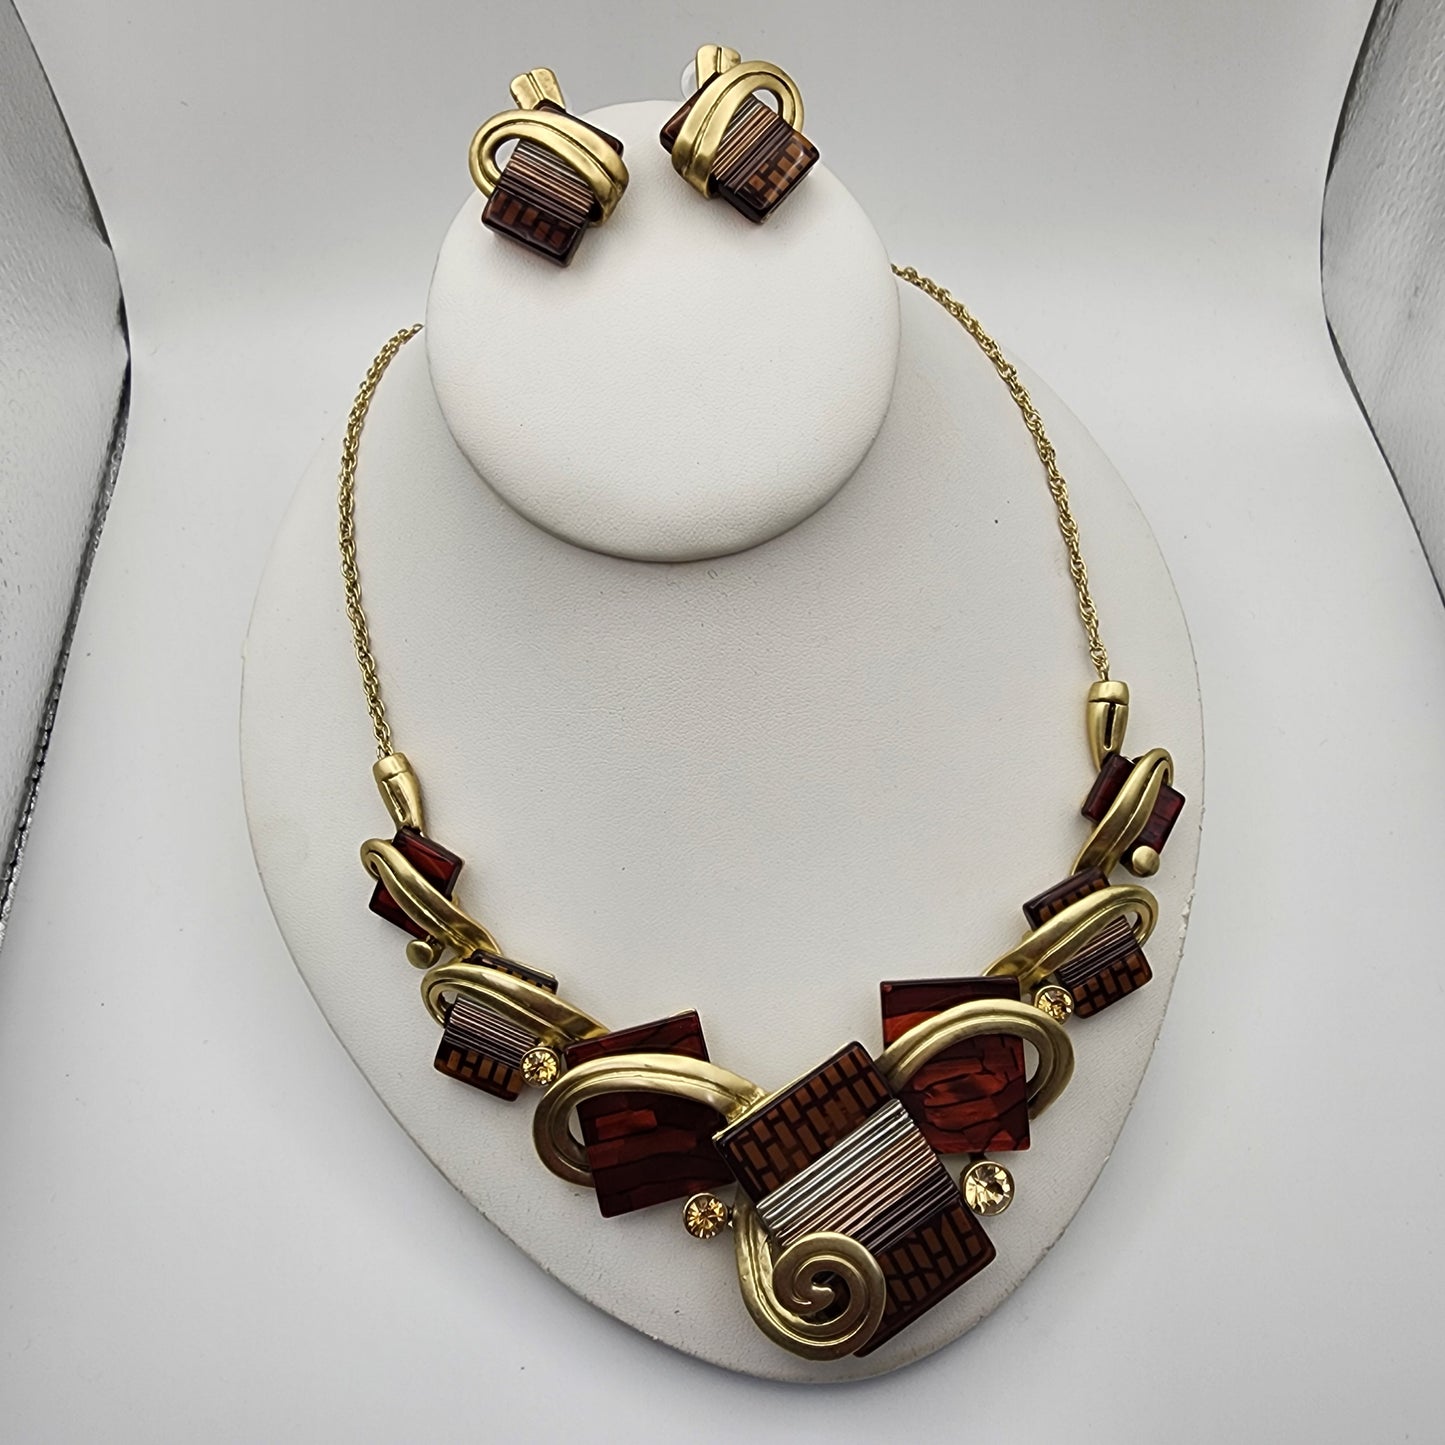 Vintage Necklace and Earrings Set